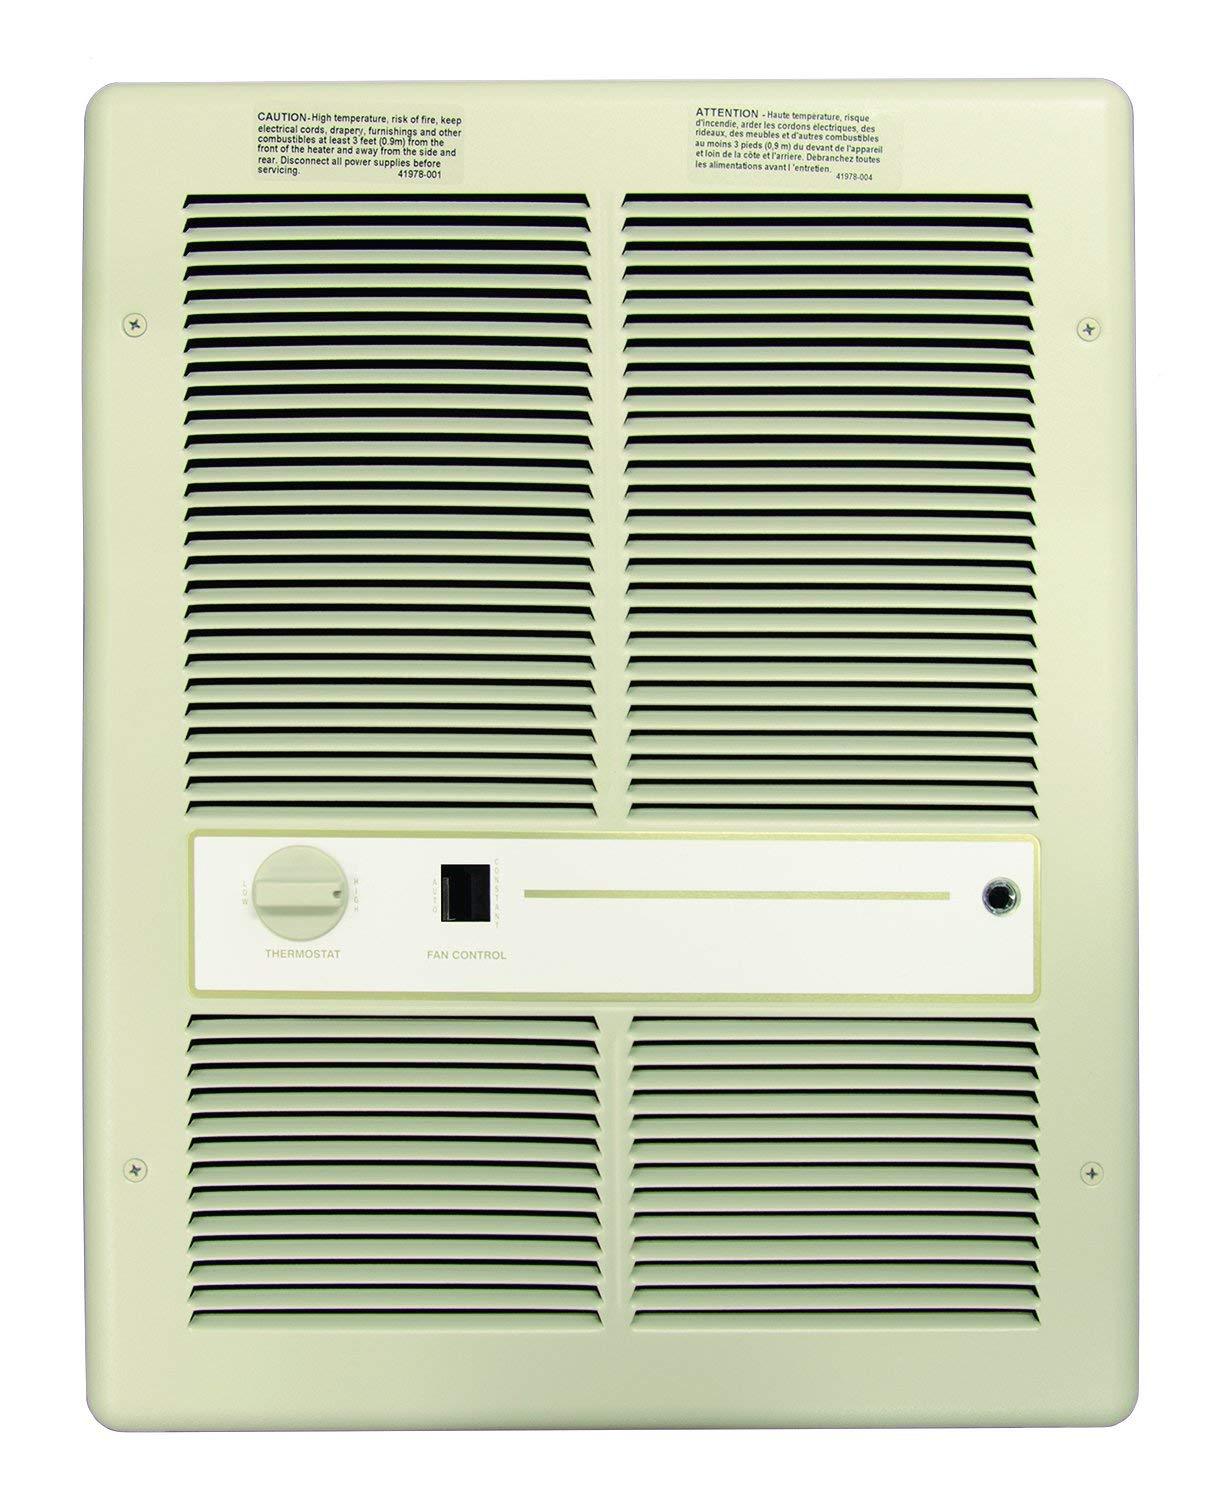 TPI 4000/3000W 240/208V 3310 Series Fan Forced Wall Heater (Ivory) - With Summer Fan Switch - 1 Pole Thermostat - HF3316TSRP